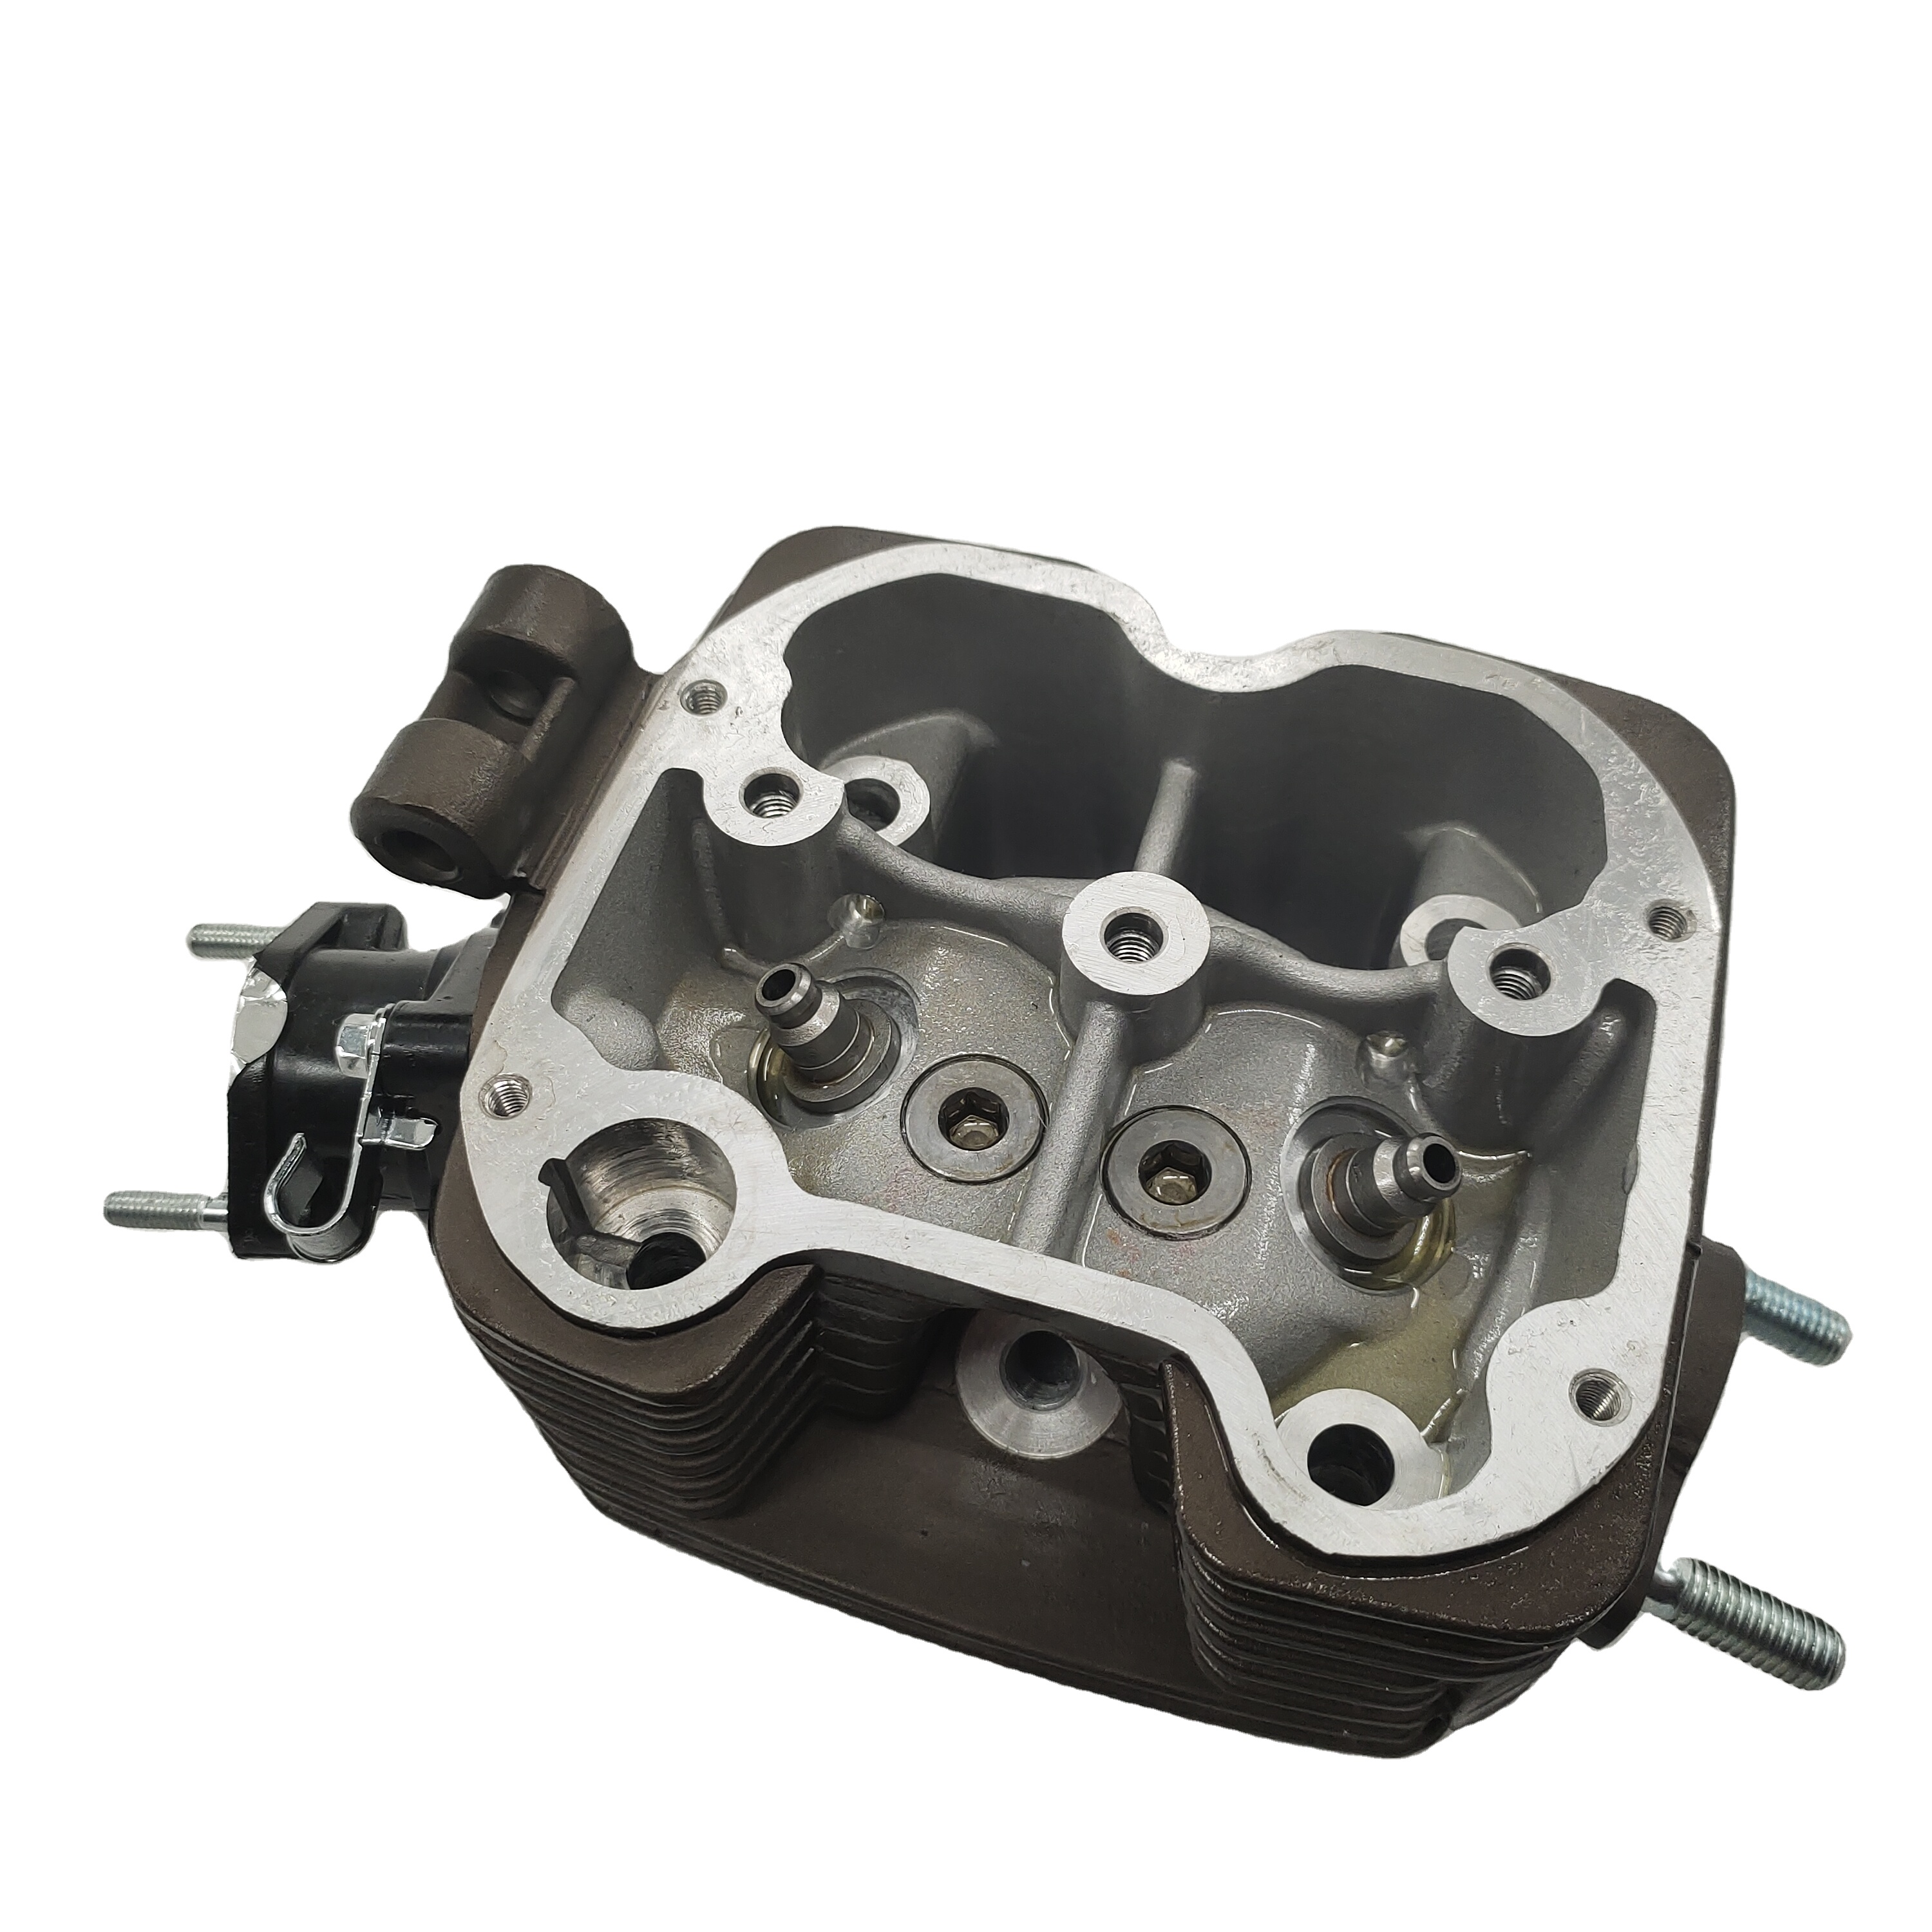 China factory new original motorcycle parts tricycle 250cc water-cooled engine cylinder head high warranty product